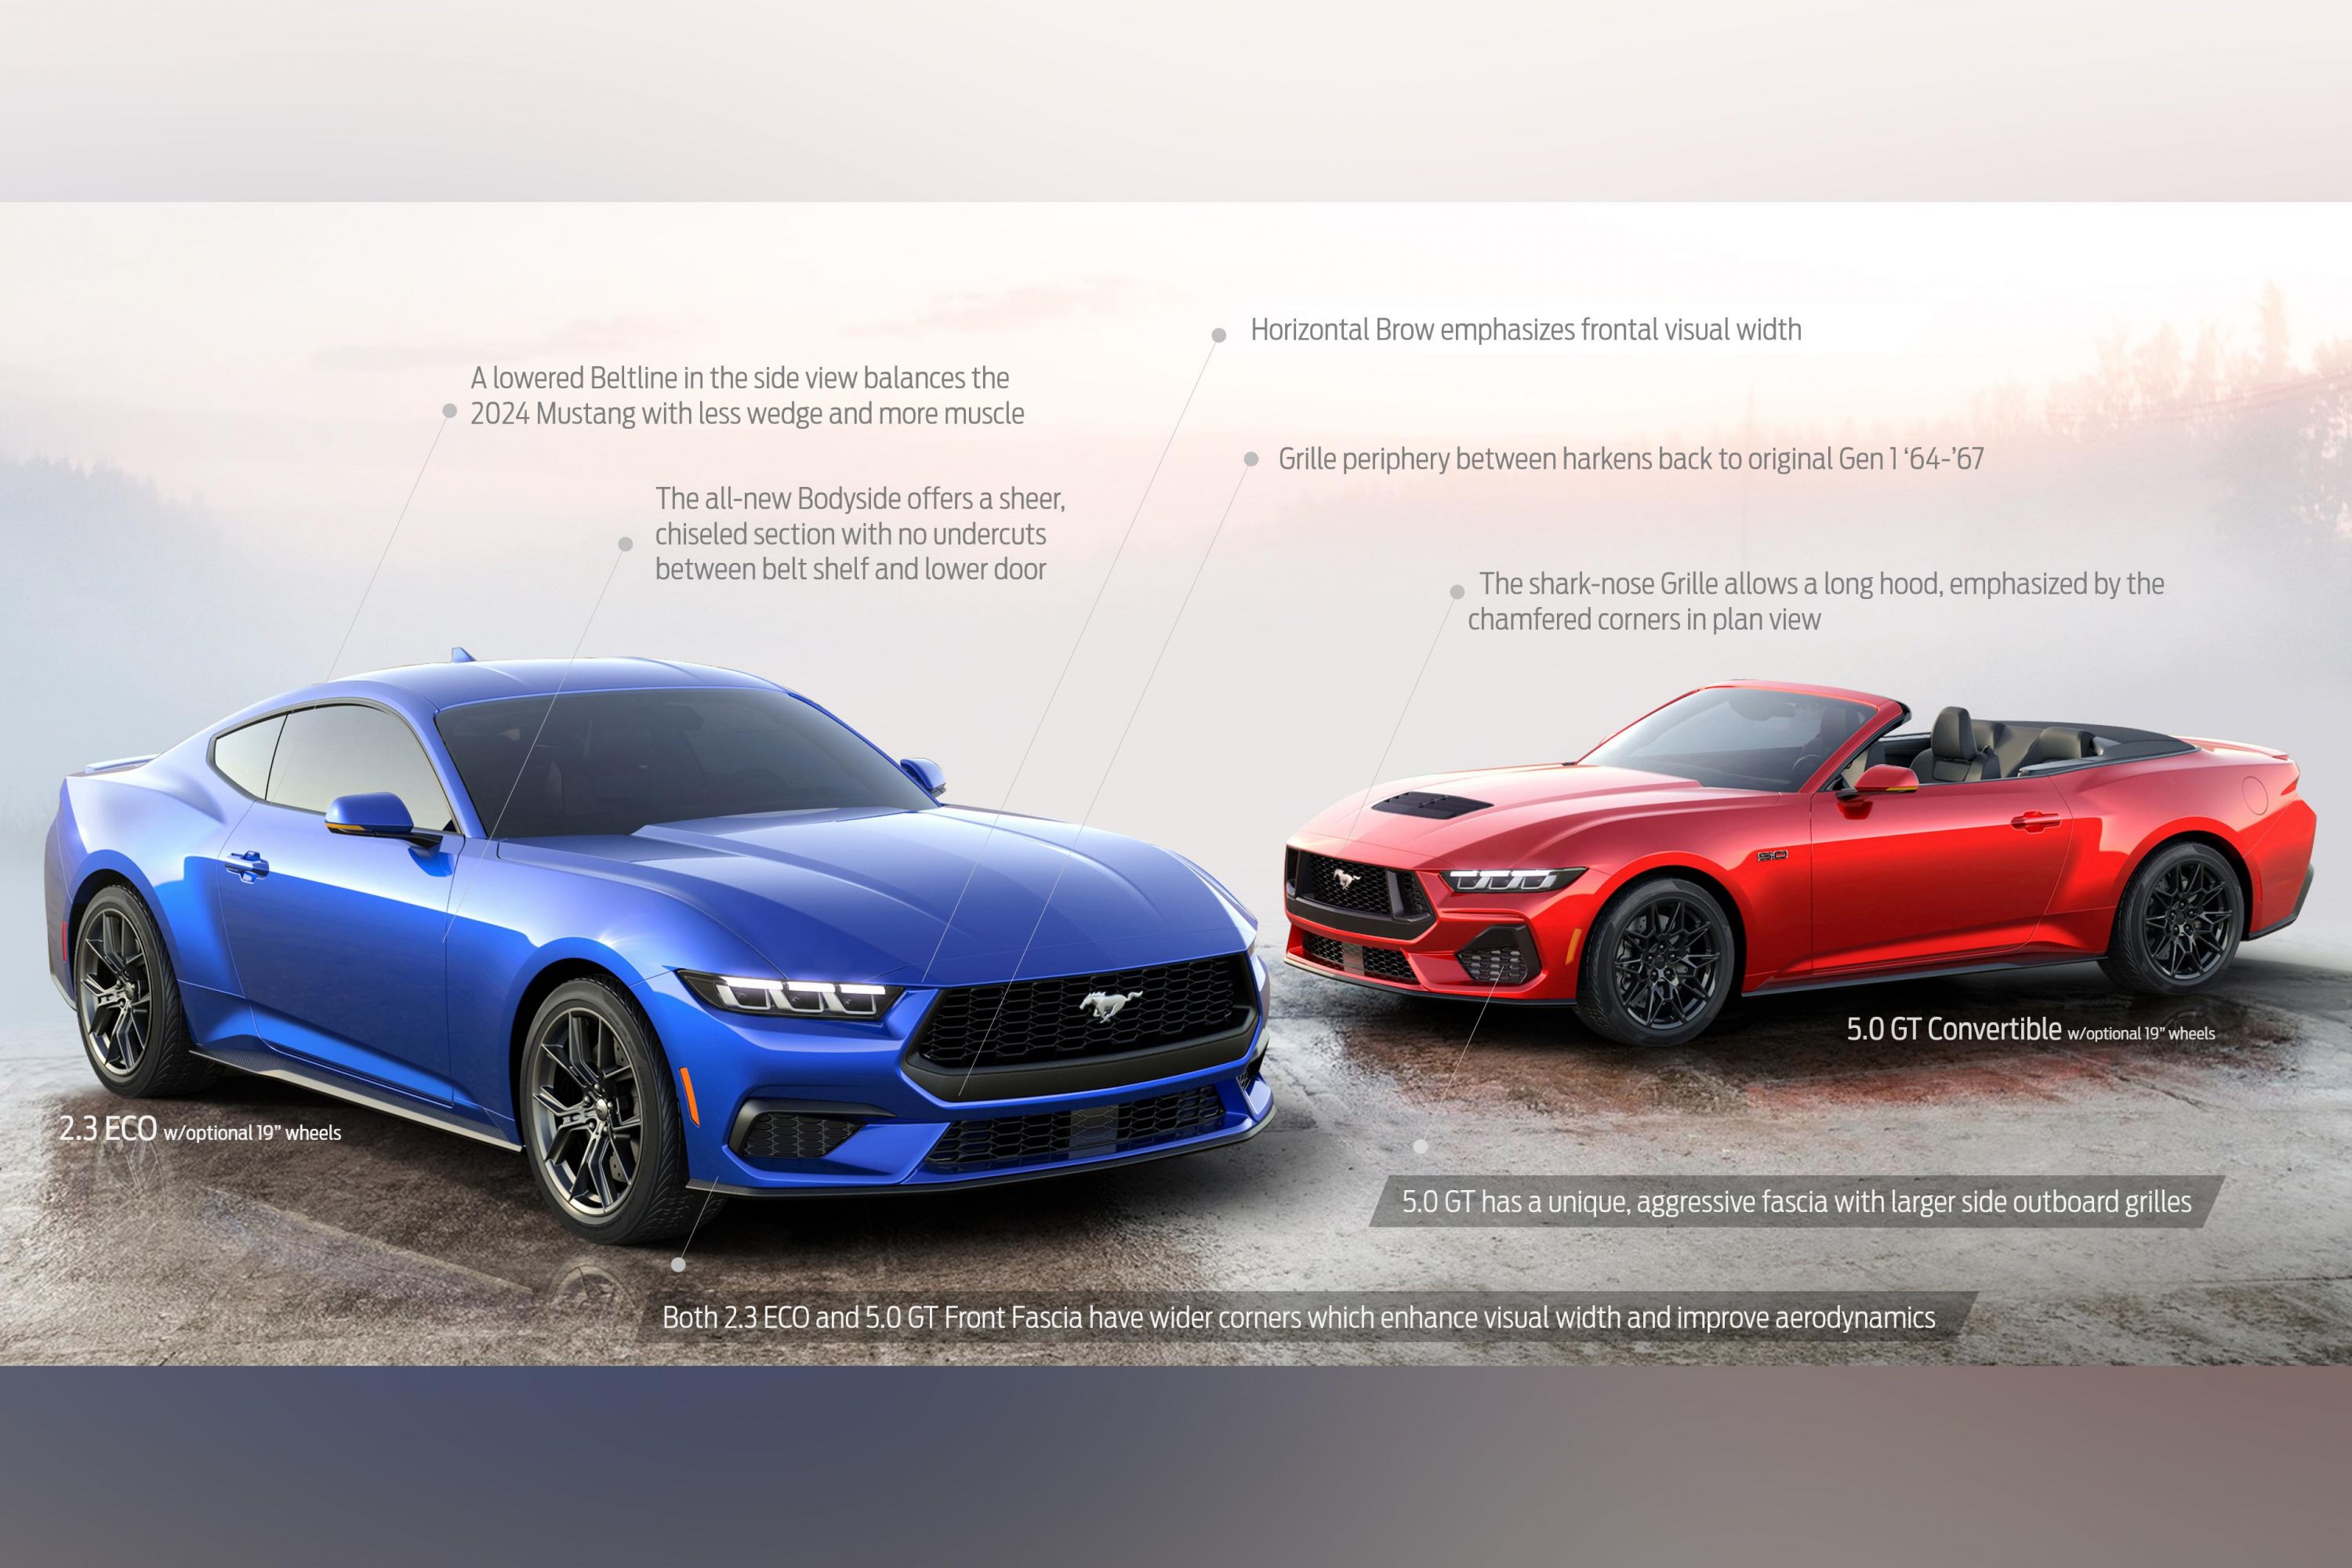 2024 Ford Mustang Pricing Announced. Here's What You Need to Know